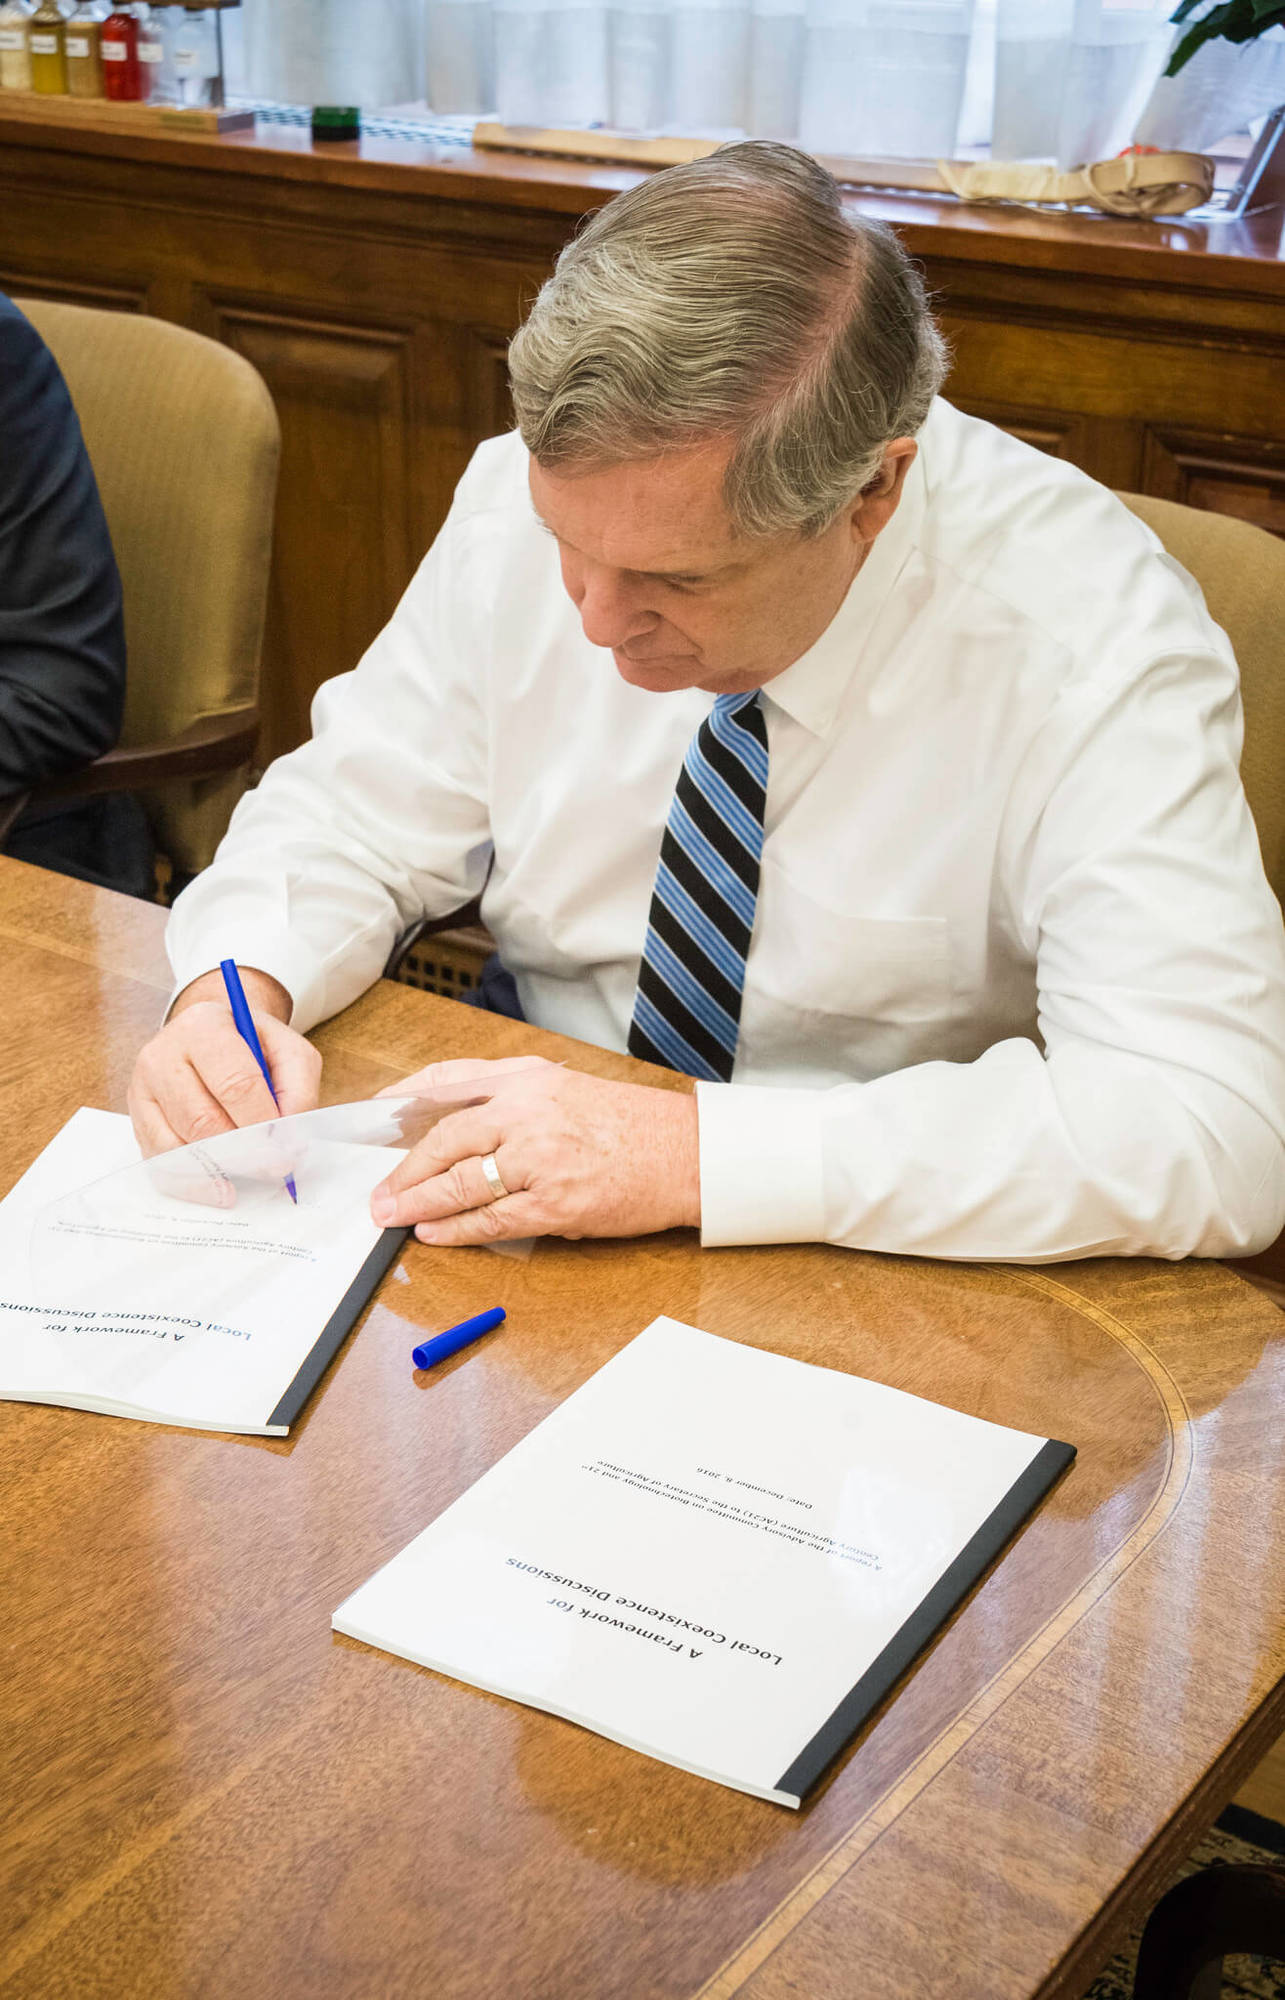 Agriculture Secretary Tom Vilsack signs copies of, “A Framework for Local Coexistence Discussions,” an important report